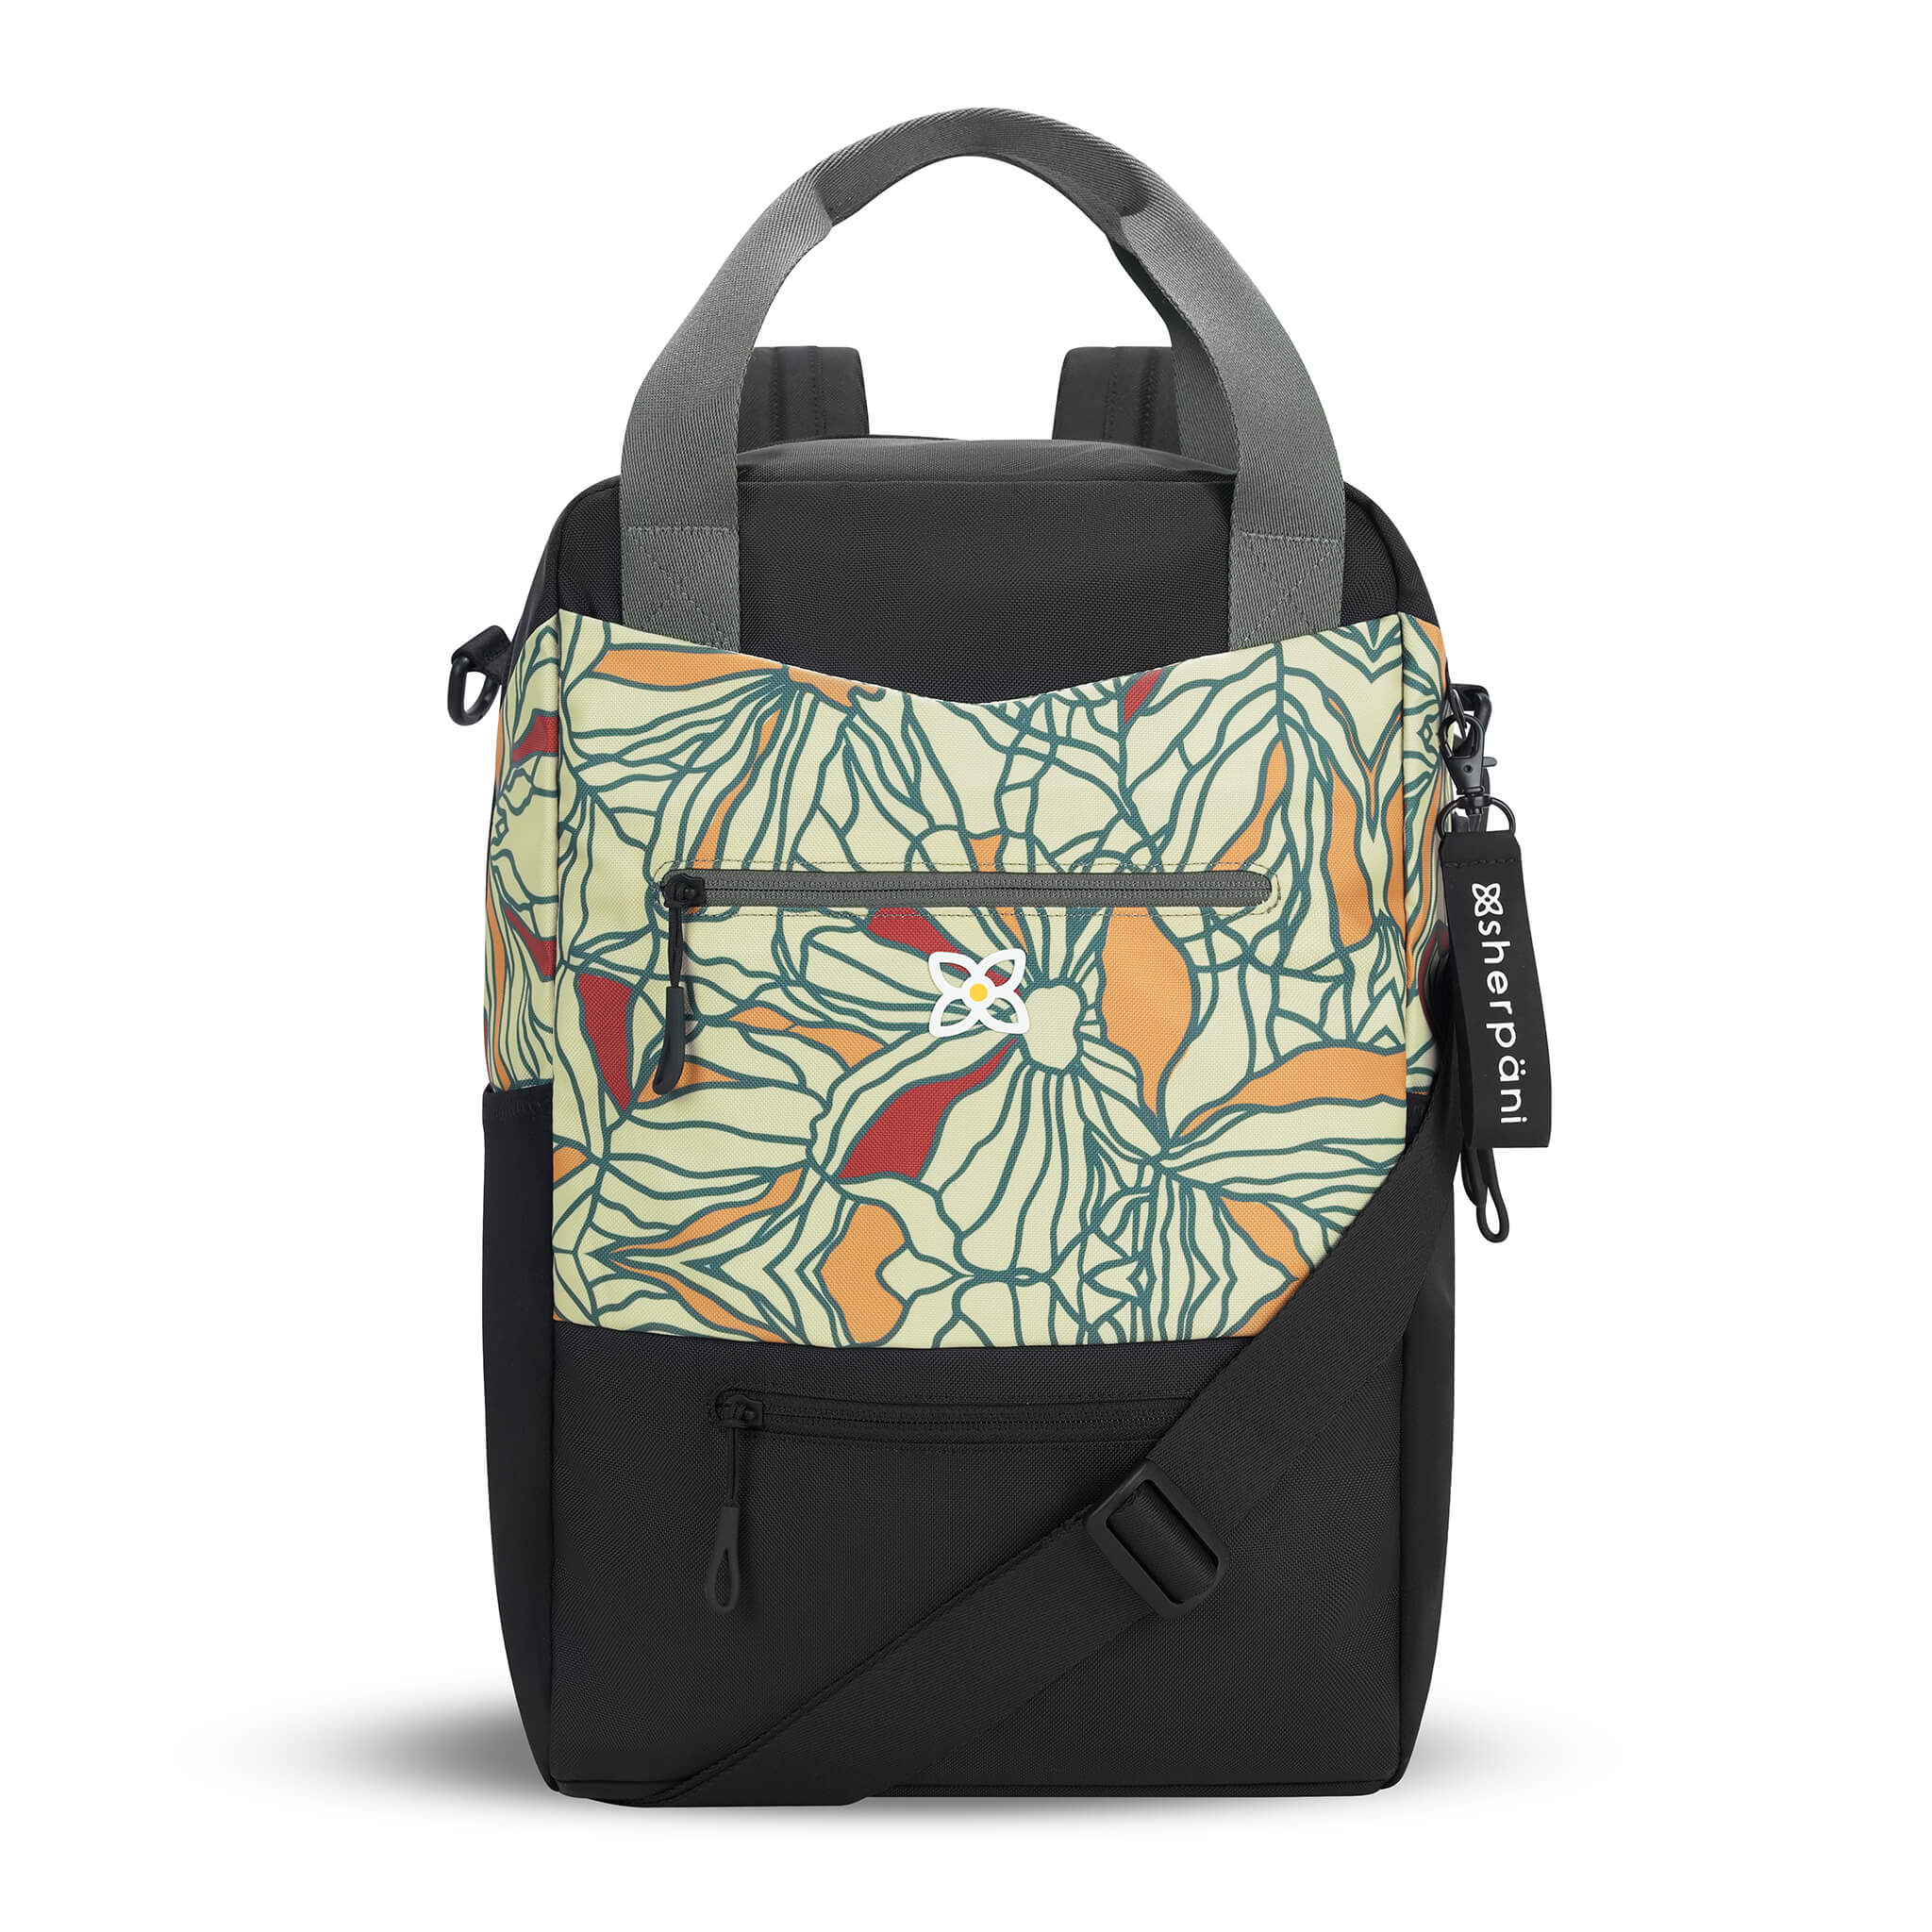 Flat front view of Sherpani convertible travel bag, the Camden in Fiori. Camden features include adjustable backpack straps, adjustable crossbody strap, tote bag handles, upper zipper pocket, lower zipper pocket, padded laptop sleeve, three water bottle holders and luggage pass through feature. The Fiori colorway is two-toned in black and a floral pattern in neutral colors with red accents. 